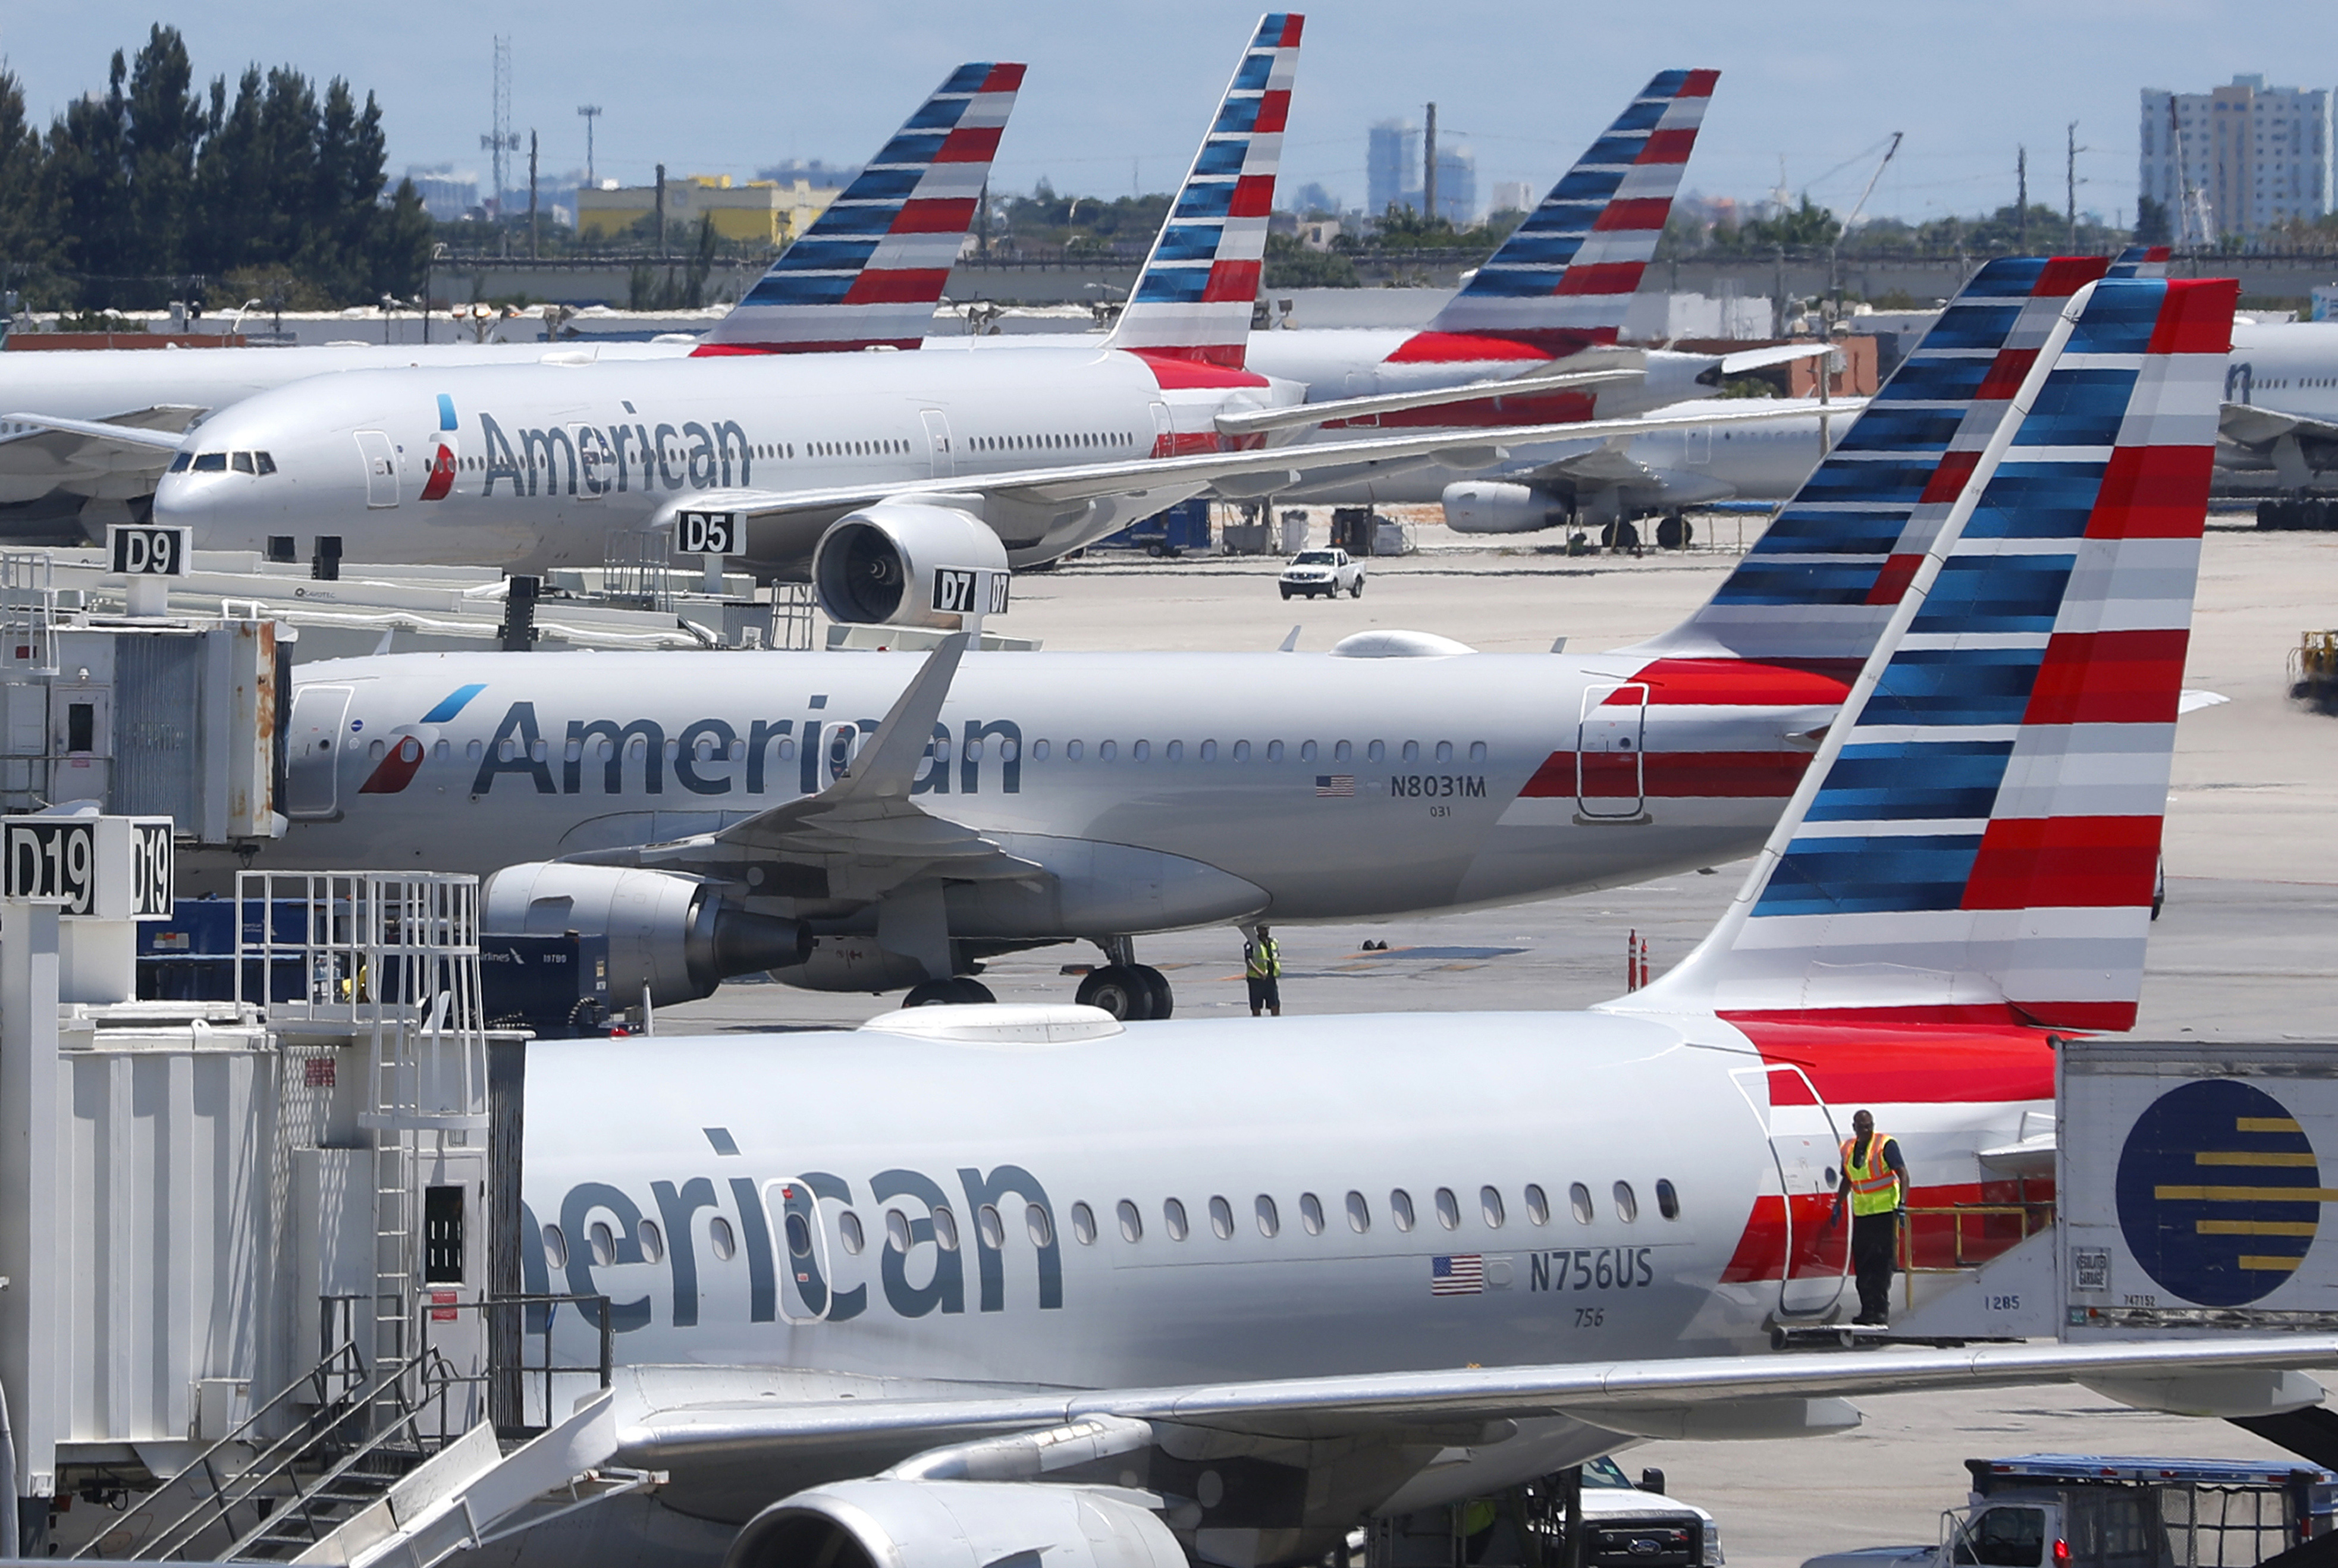 American Airlines mechanic accused of sabotaging flight | Inquirer News